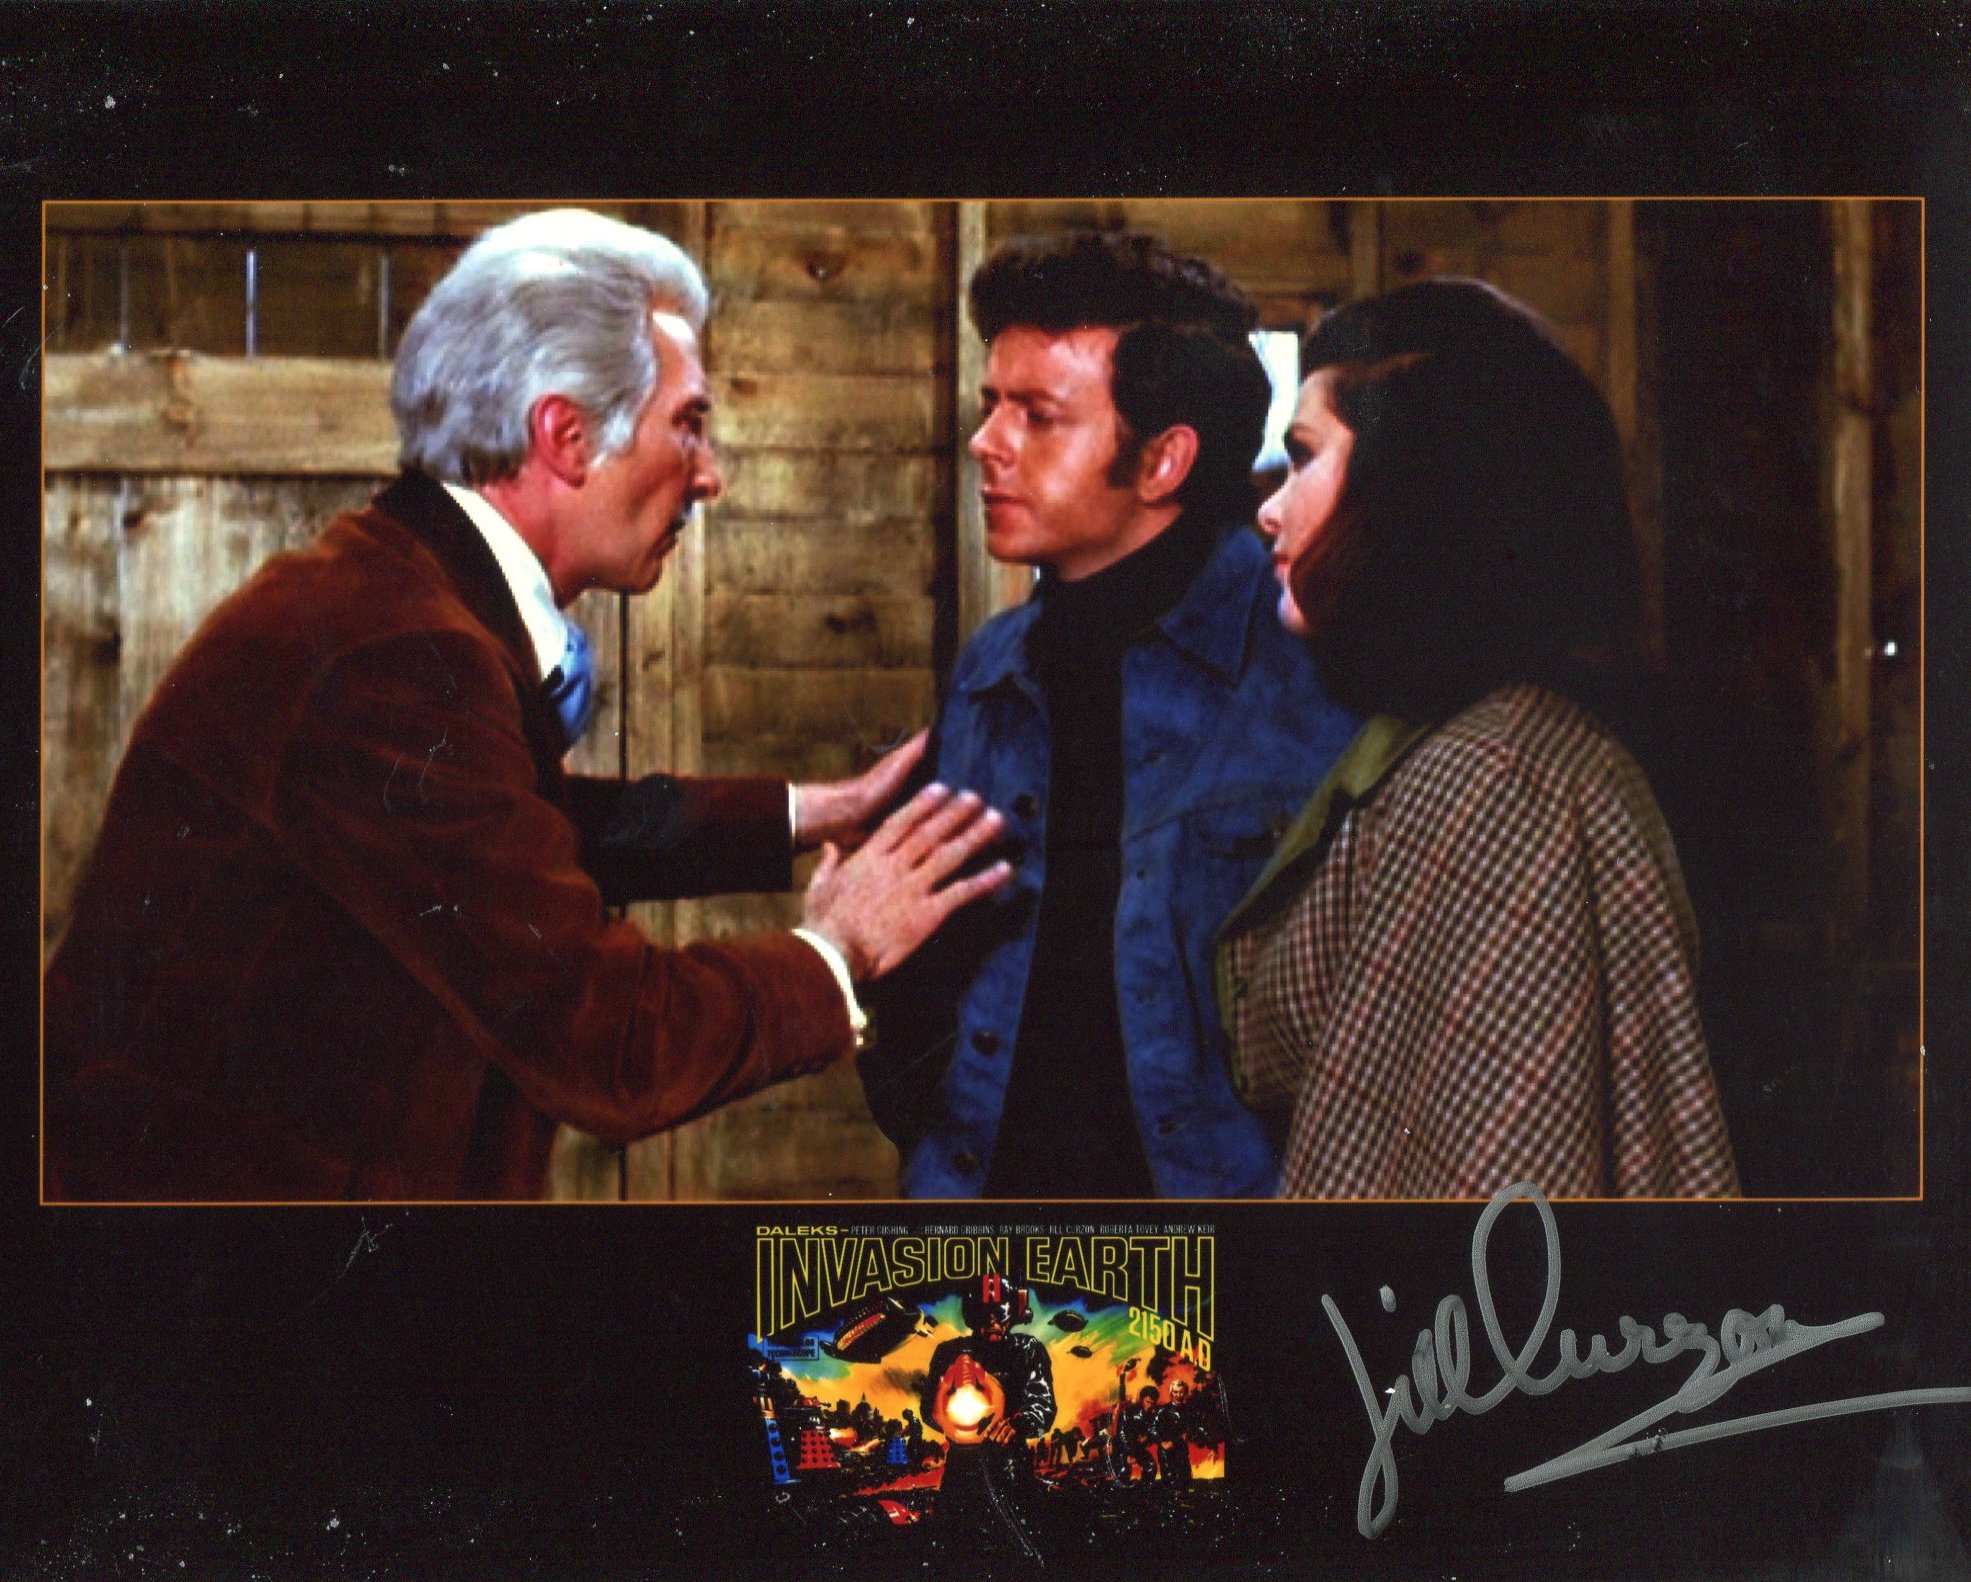 Jill Curzon actress signed Doctor Who Invasion Earth movie photo. Good condition. All autographs